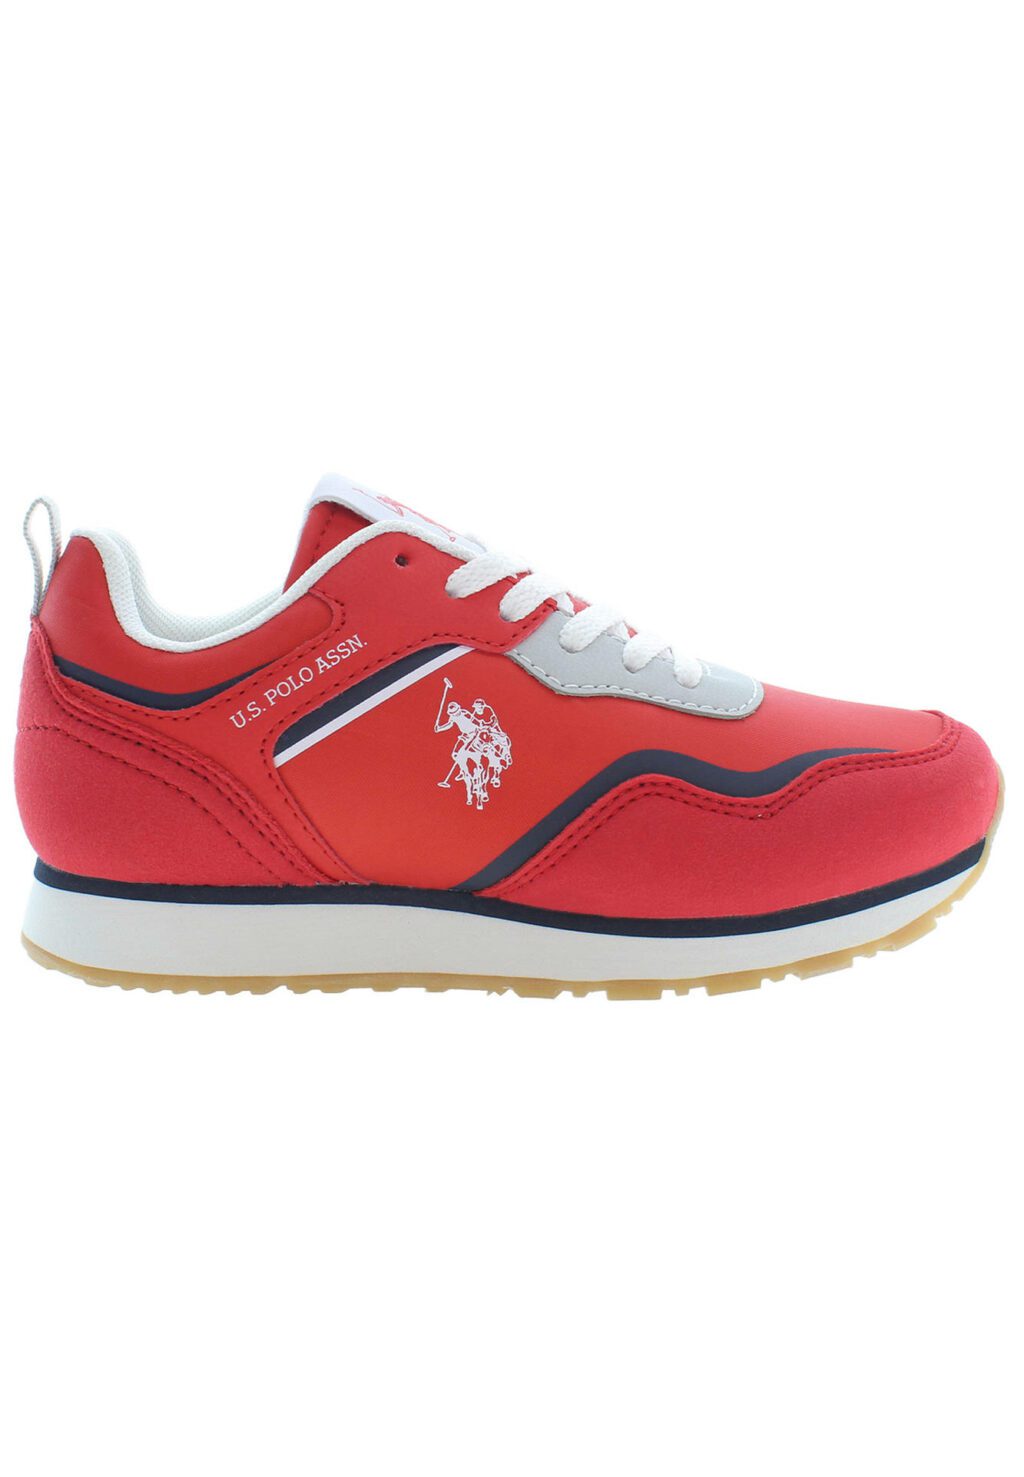 US POLO BEST PRICE RED SPORTS SHOES FOR KIDS NOBIK010K3NH1_ROSSO_RED-DBL02